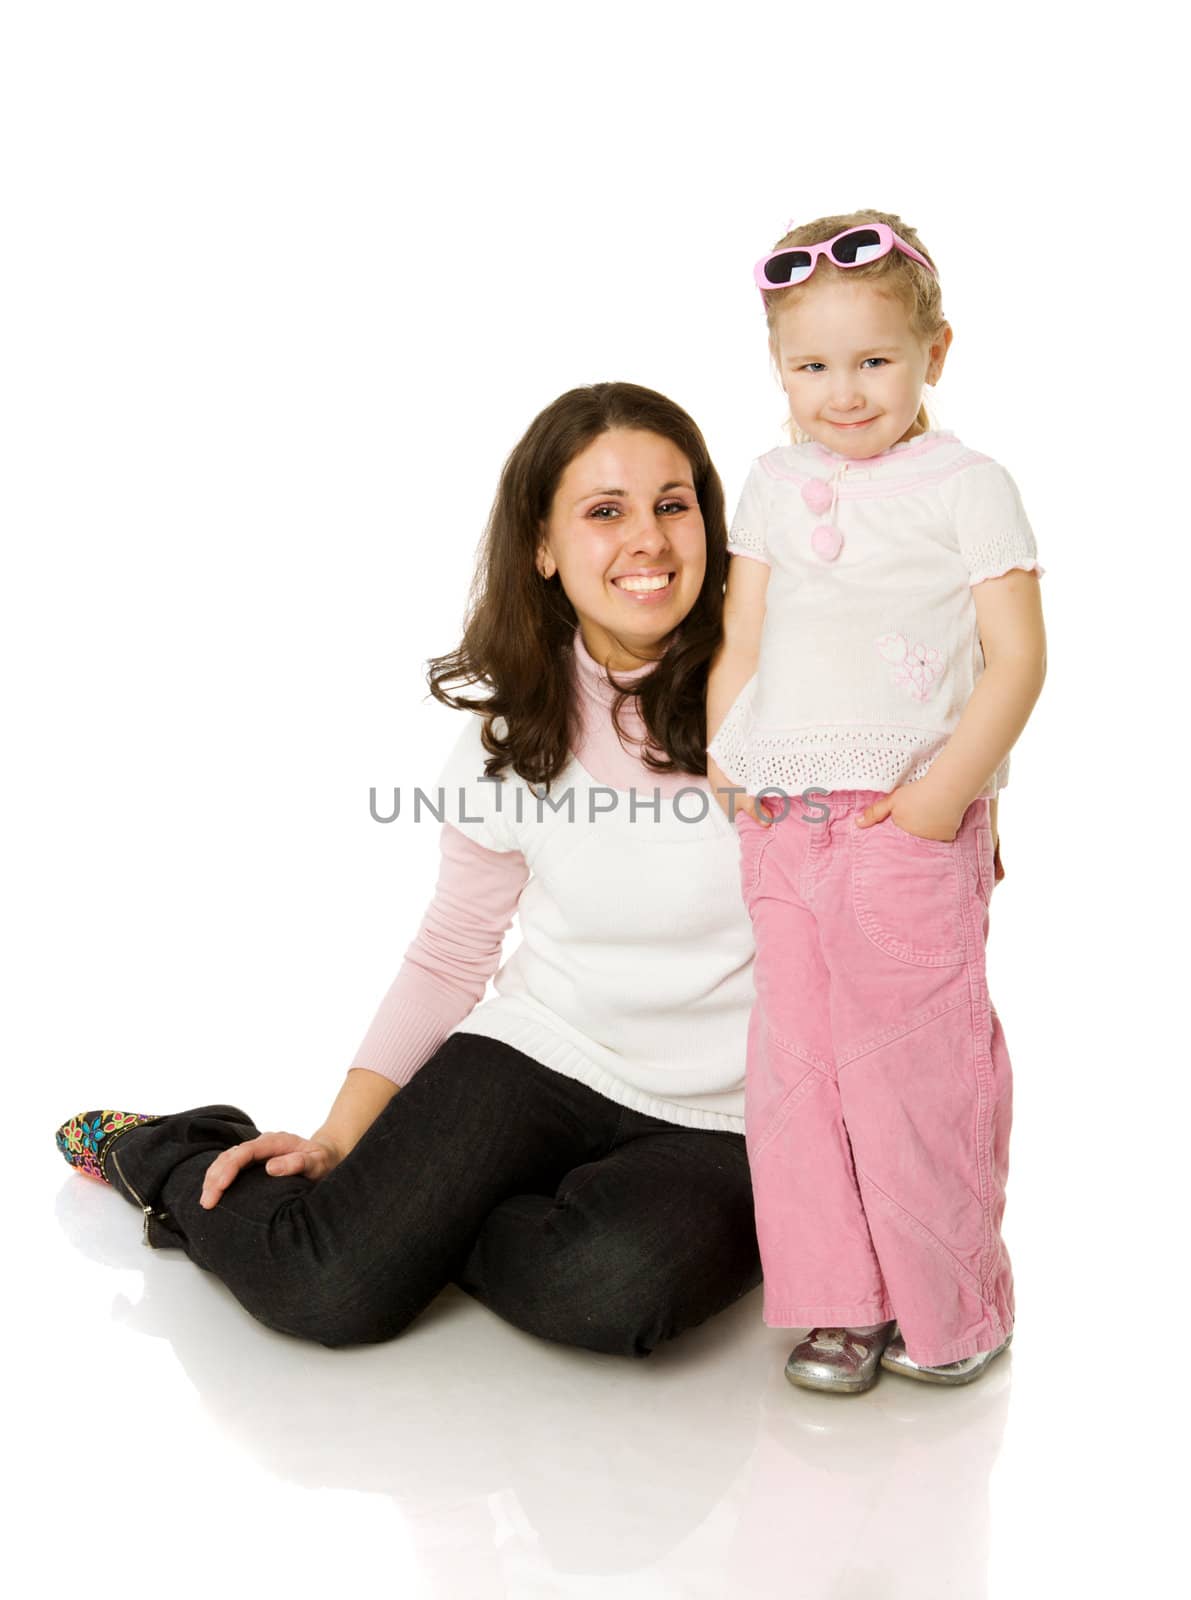 mother and daughter posing together  isolated on white